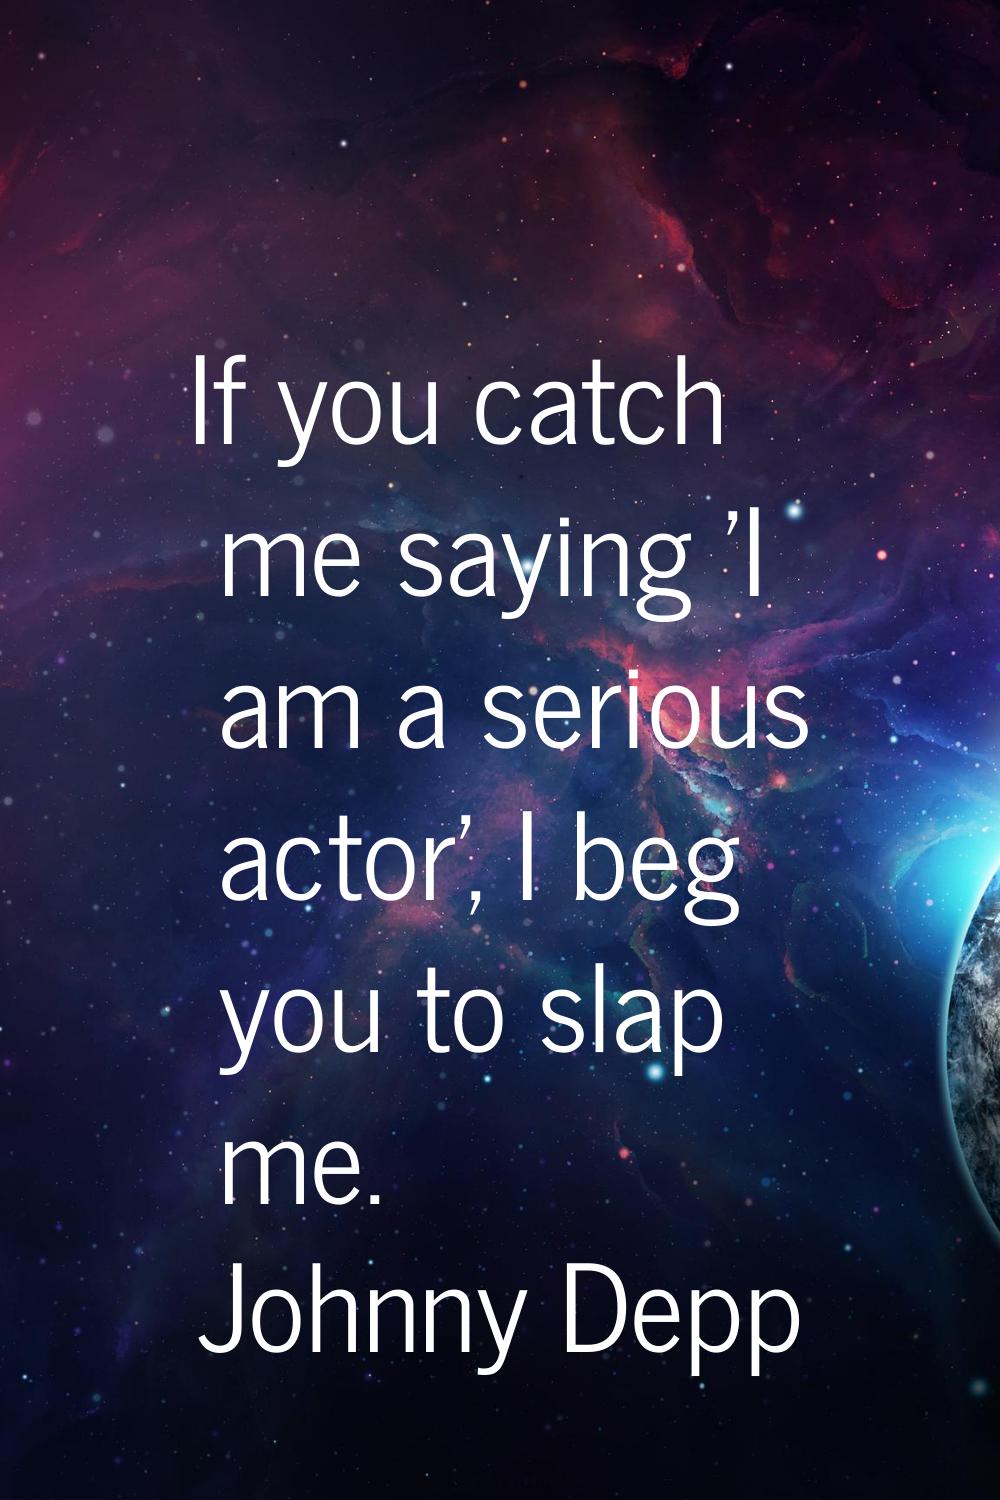 If you catch me saying 'I am a serious actor', I beg you to slap me.